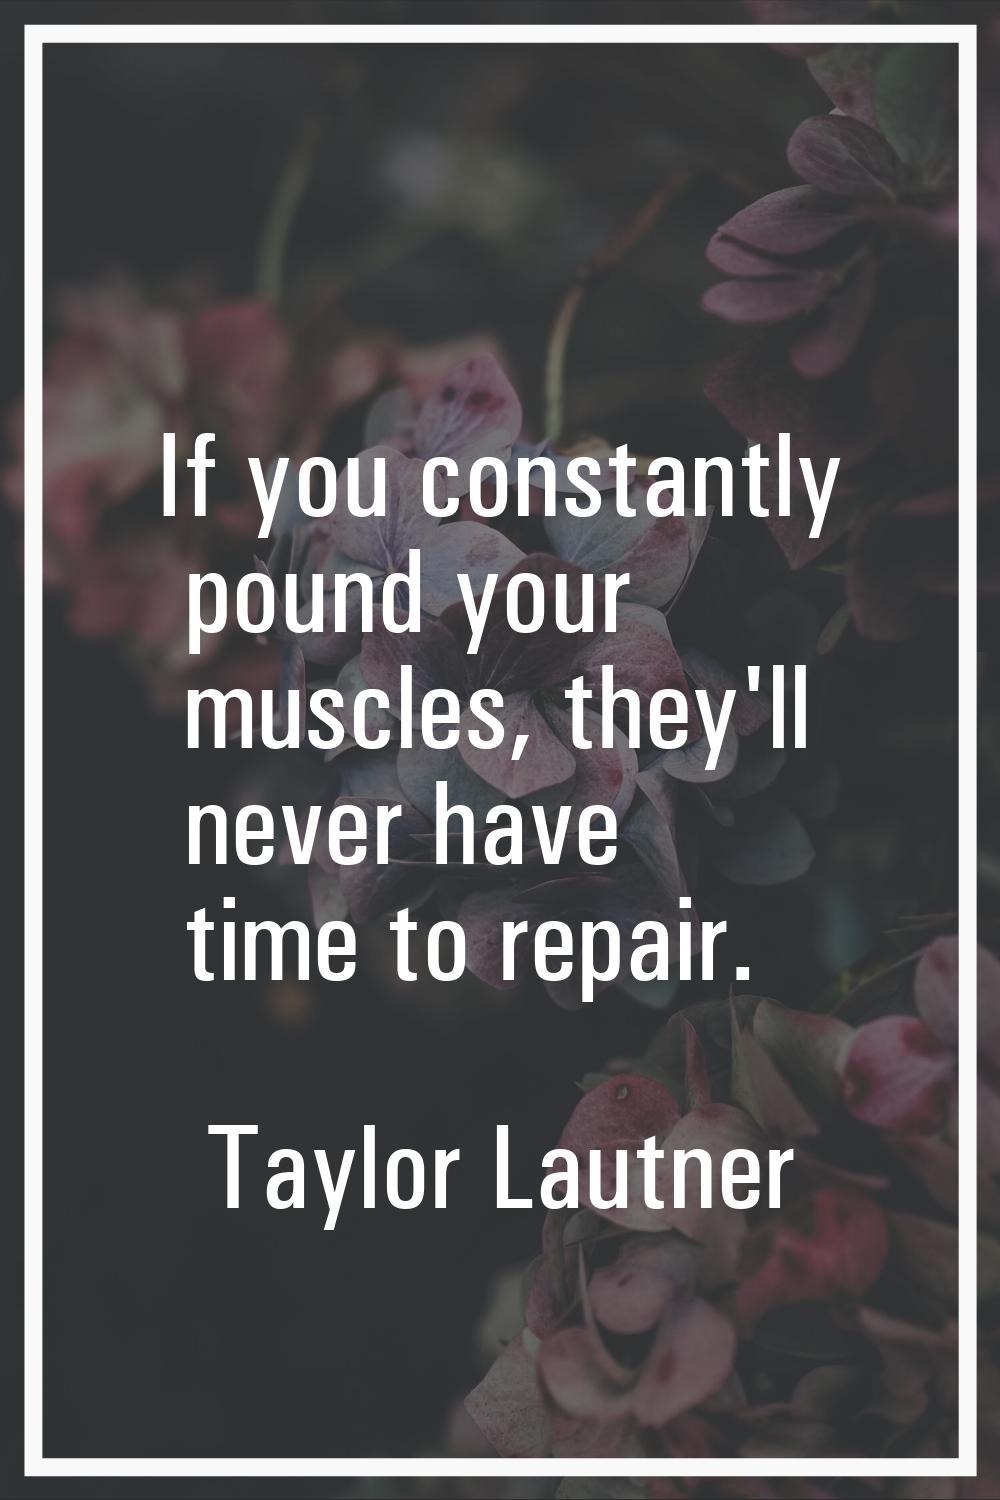 If you constantly pound your muscles, they'll never have time to repair.